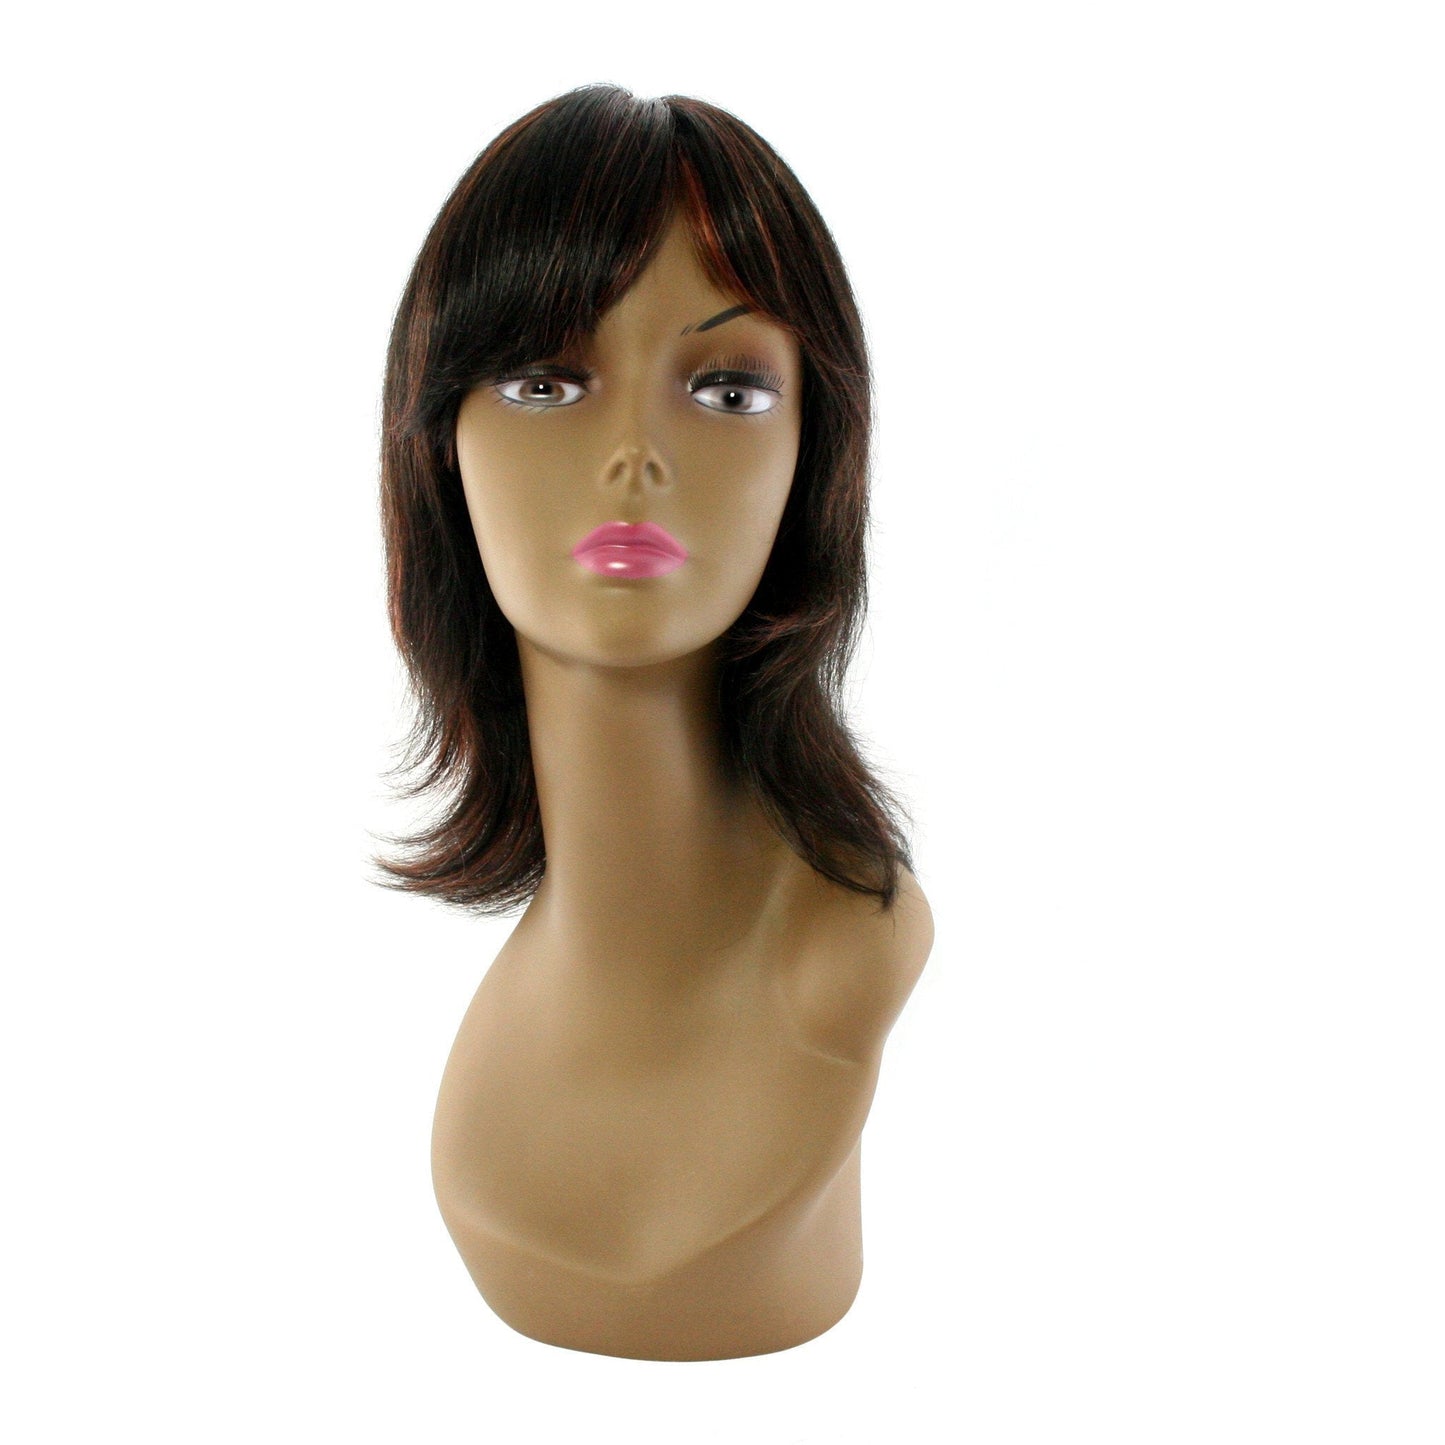 Pallet # 146 -  100% Human Hair  Wig - variety of styles and colors - 423 PIECES HUMAN HAIR WIGS X, Y, Z